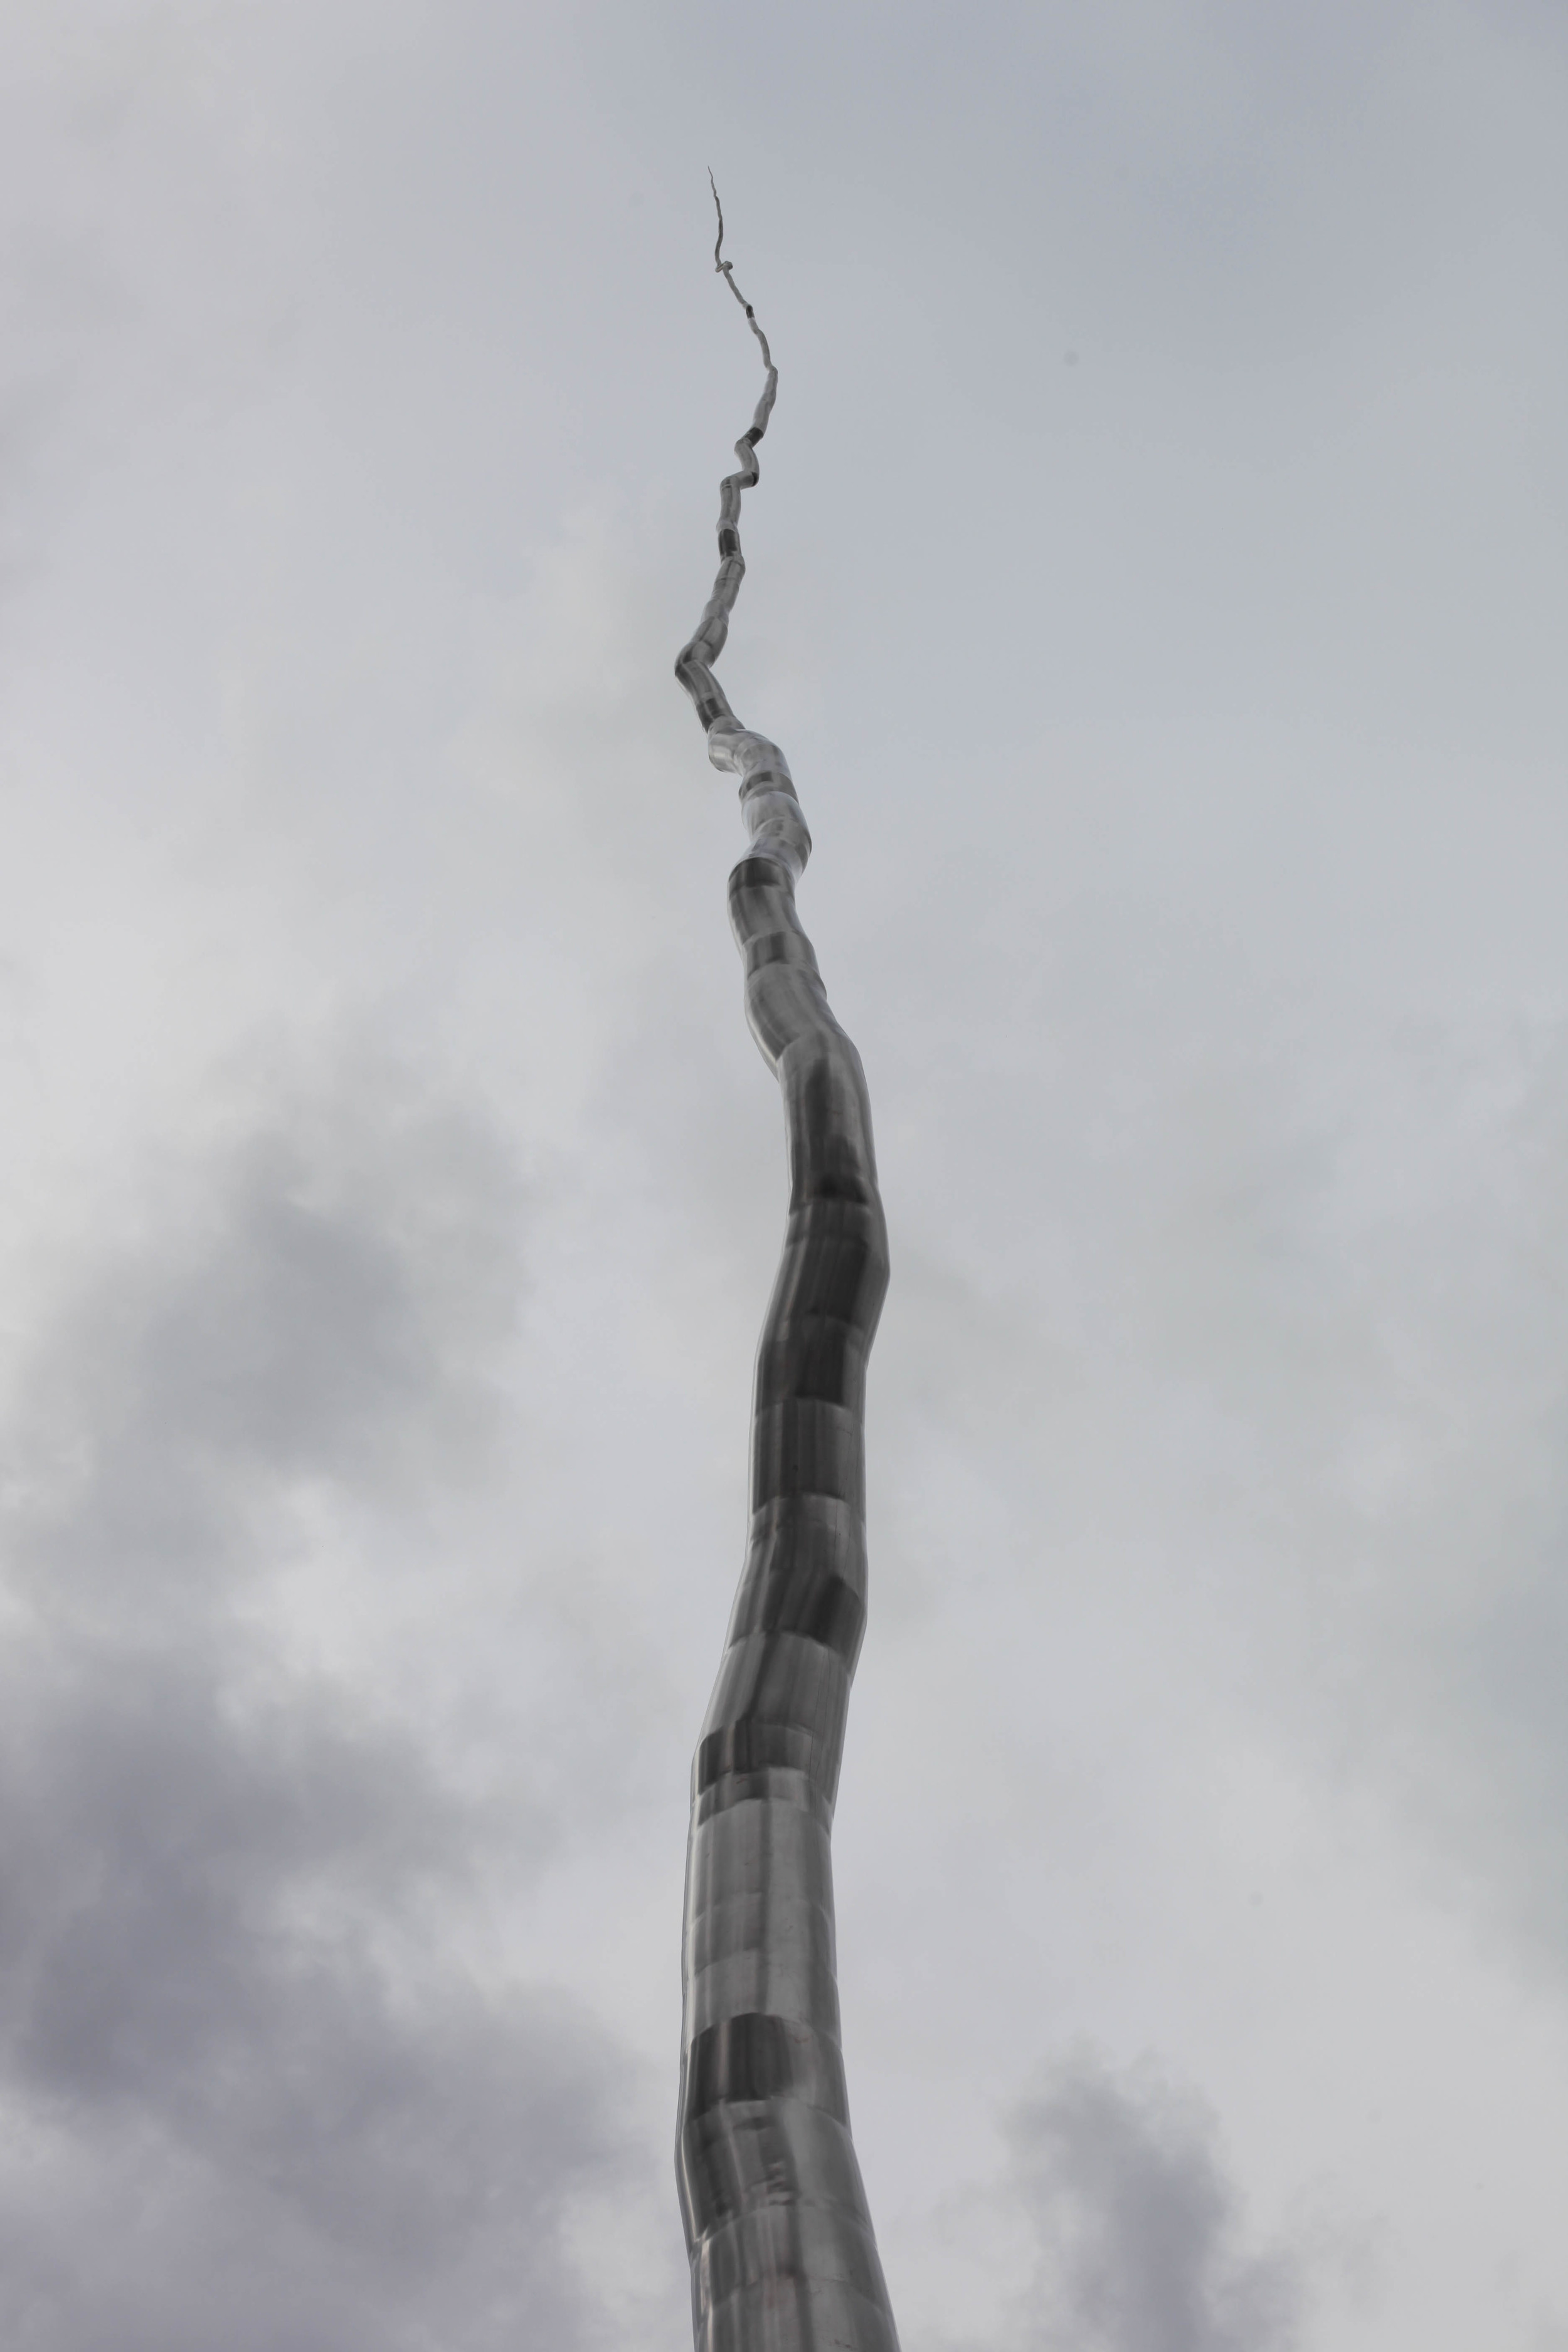  One Hundred Foot Line, 2010, Stainless steel, 103 x 8 x 10 feet   Located on the historica Napean Point and overlooking the Ottawa River,&nbsp;  One Hundred Foot Line  &nbsp;first began as the most controversial sculpture in the Dendroid series, to 